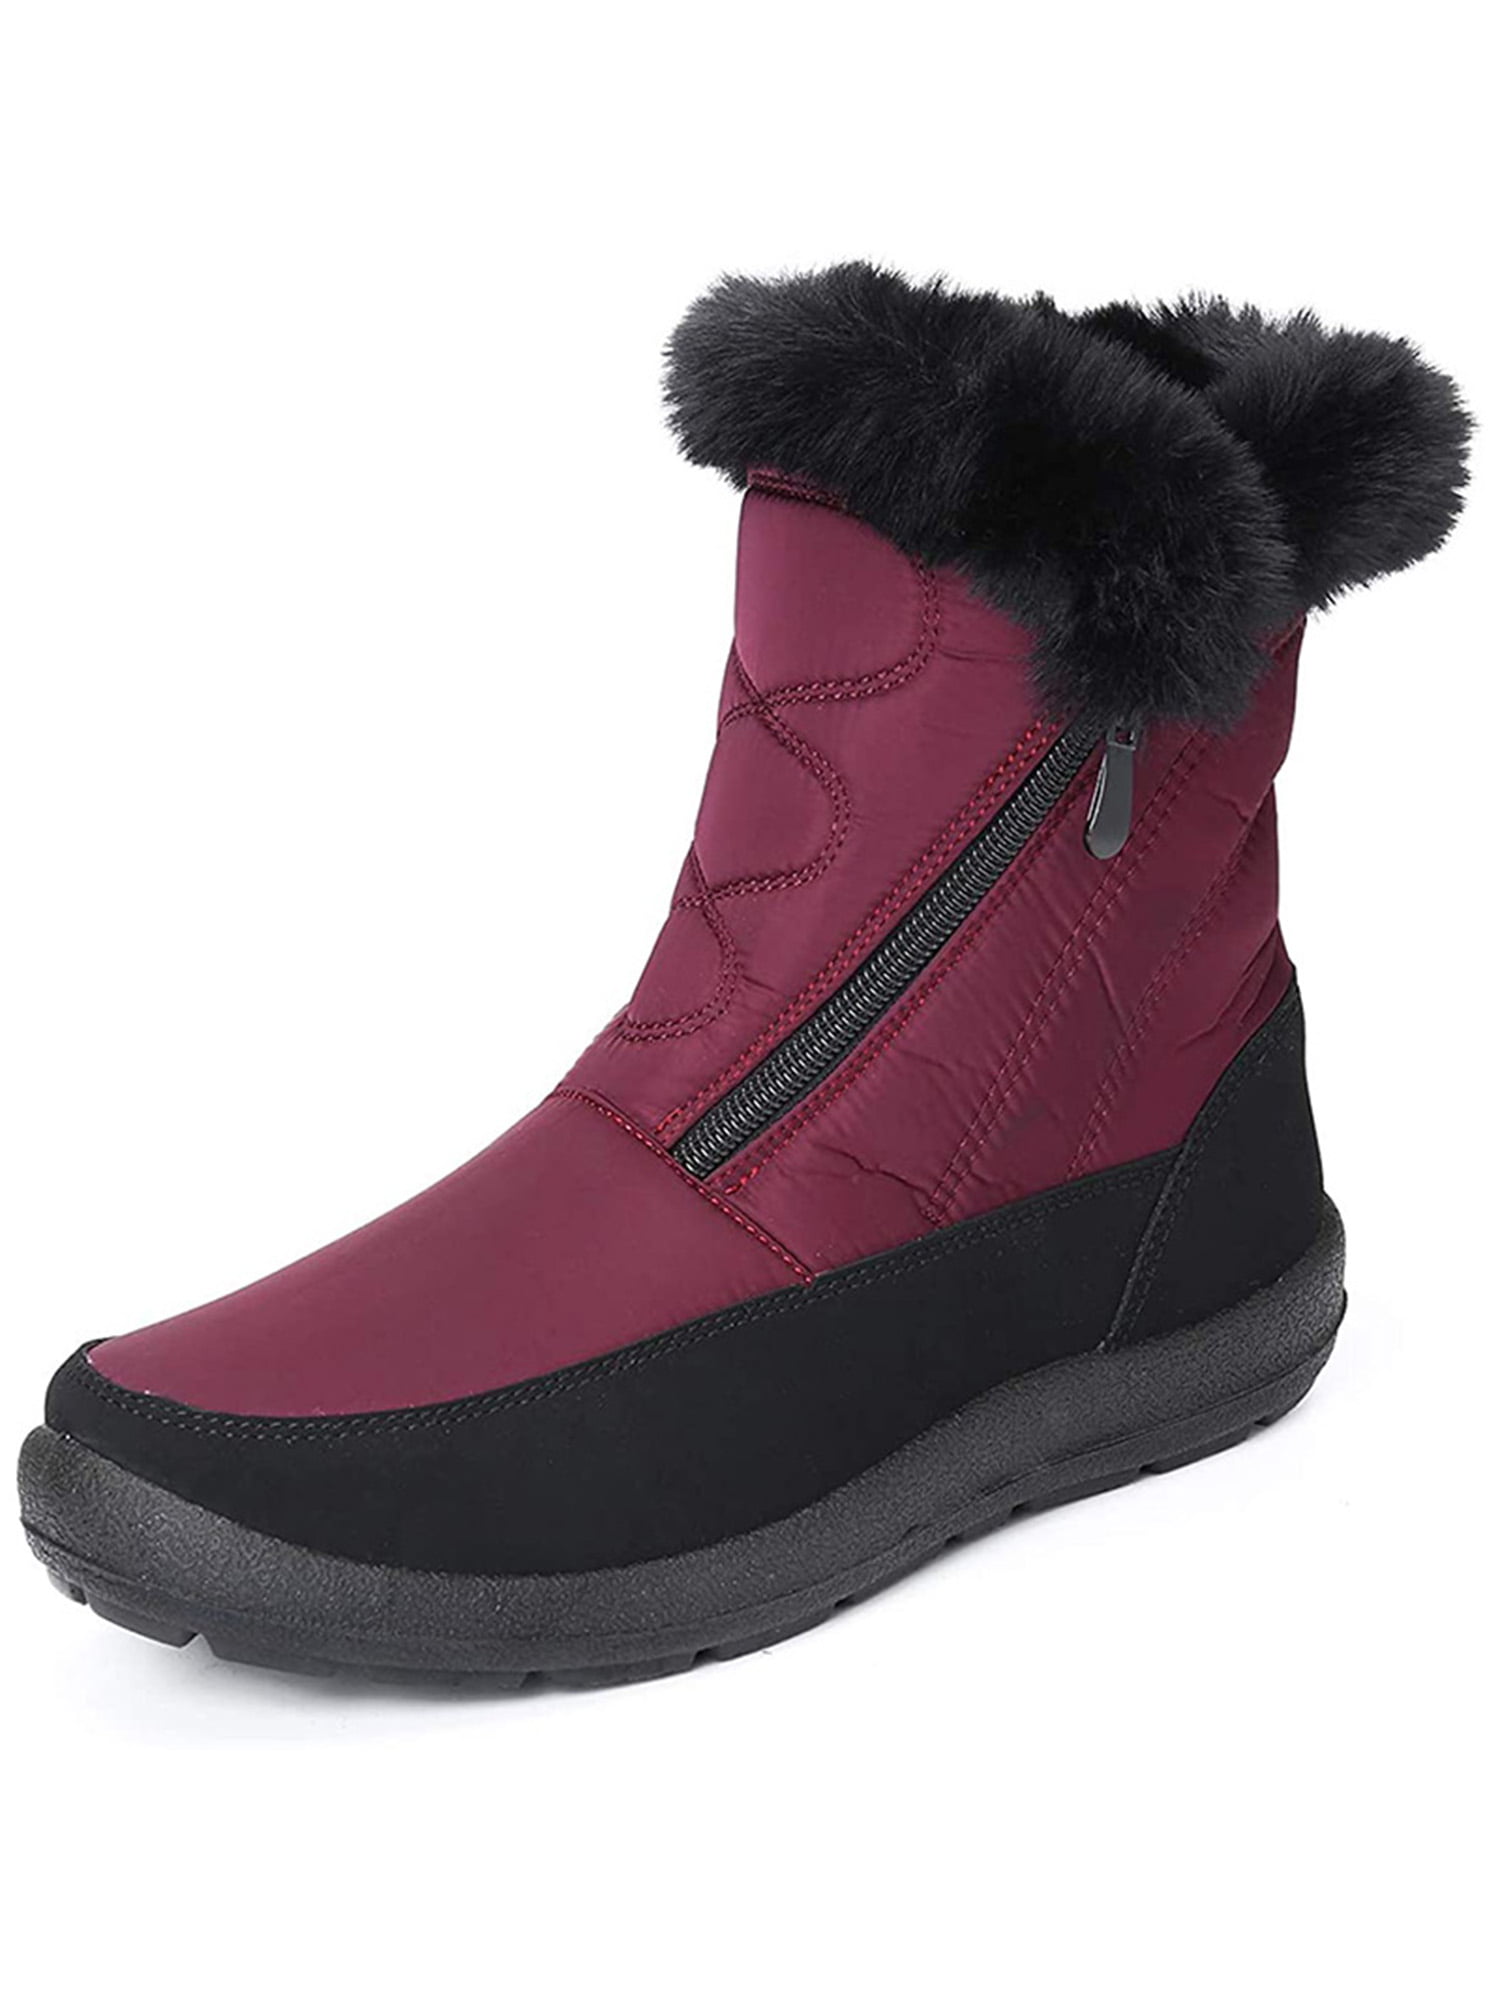 Mens Ladies Womens Boots Thermal Waterproof Warmlined Winter Mid Calf Shoes Size 